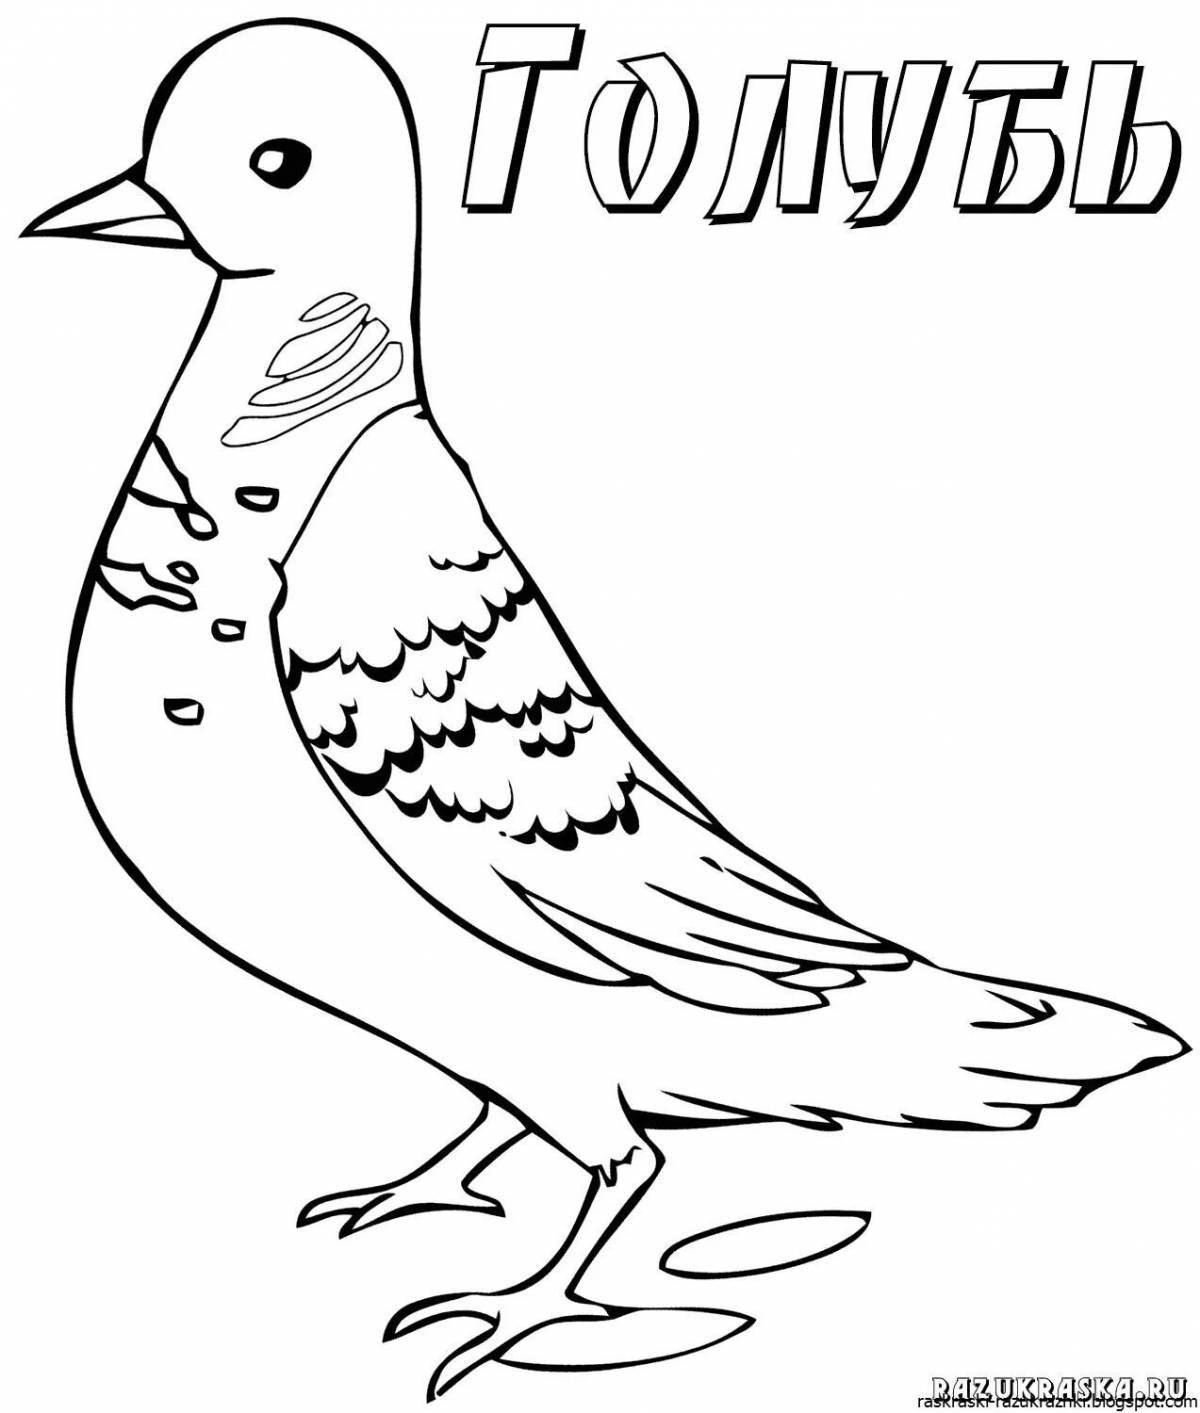 Violent coloring dove for children 3-4 years old